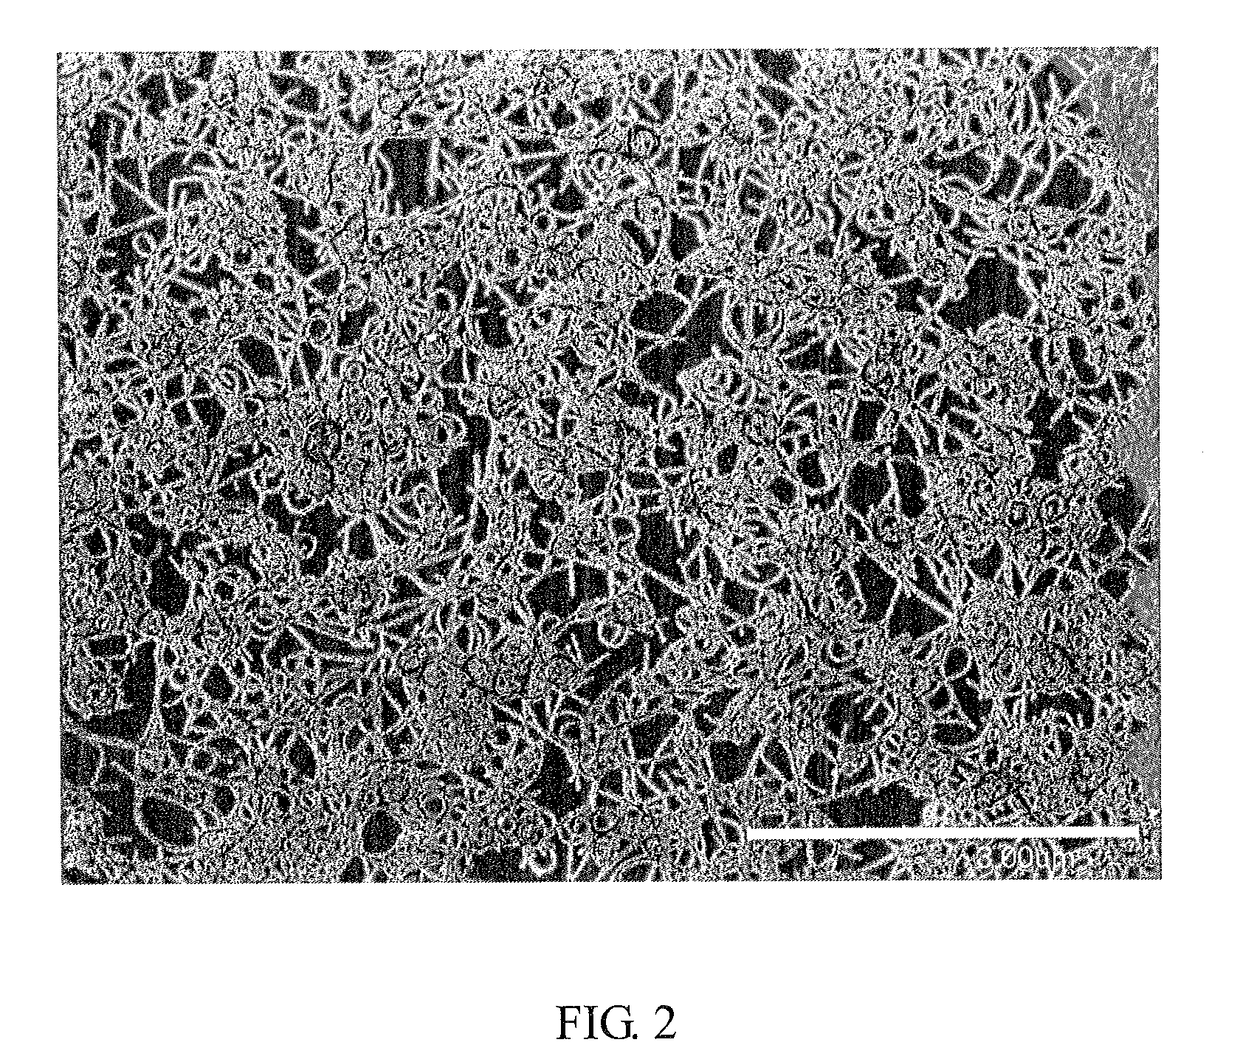 Apparatus and method for aerosol deposition of nanoparticles on a substrate